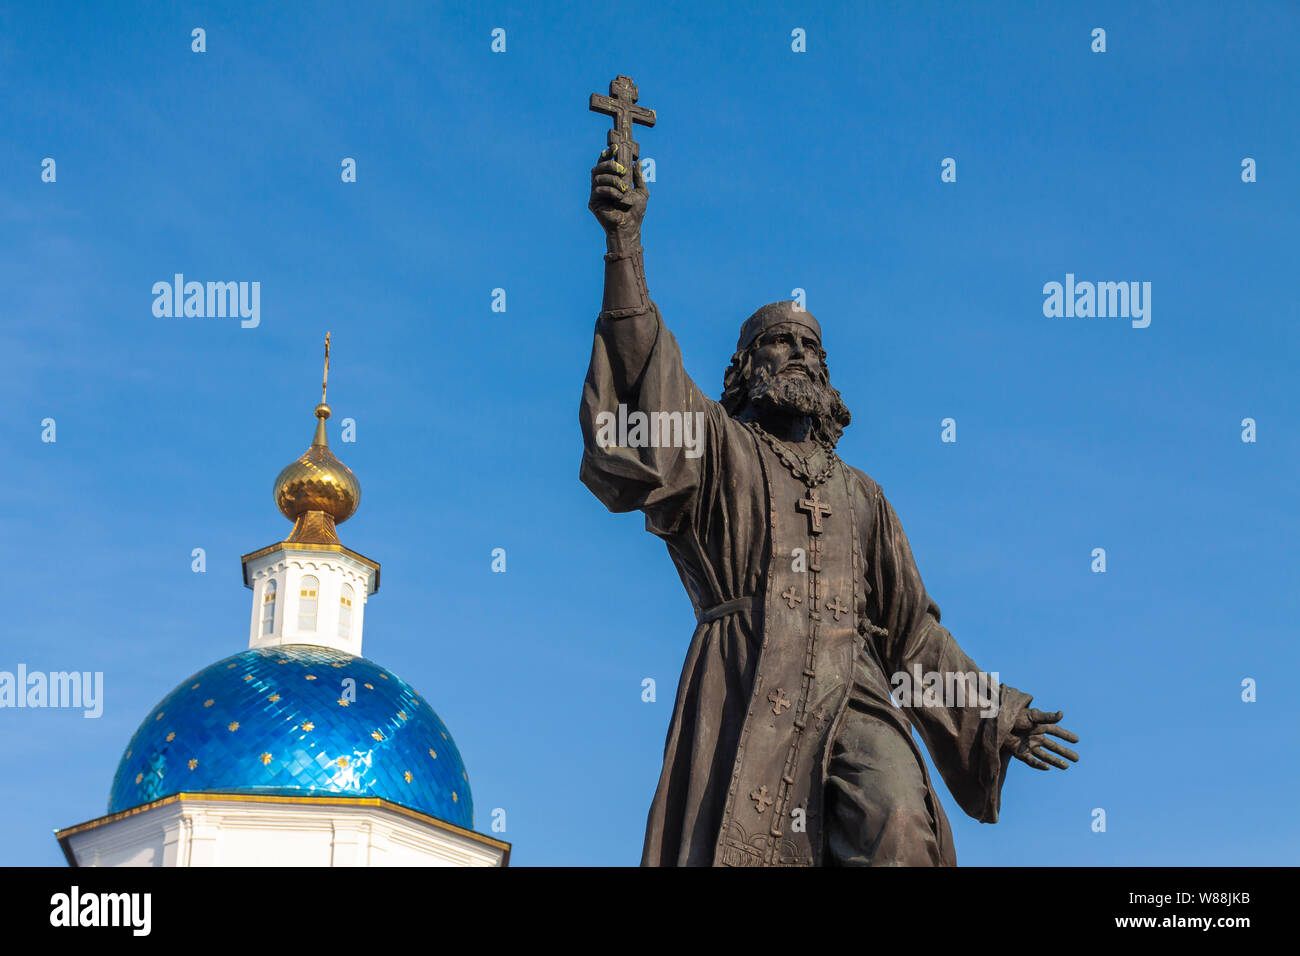 Maloyaroslavets, Russia - 09.09.2018: Monument to the military priest. Monument to a military priest who entered the Patriotic War of 1812. Stock Photo